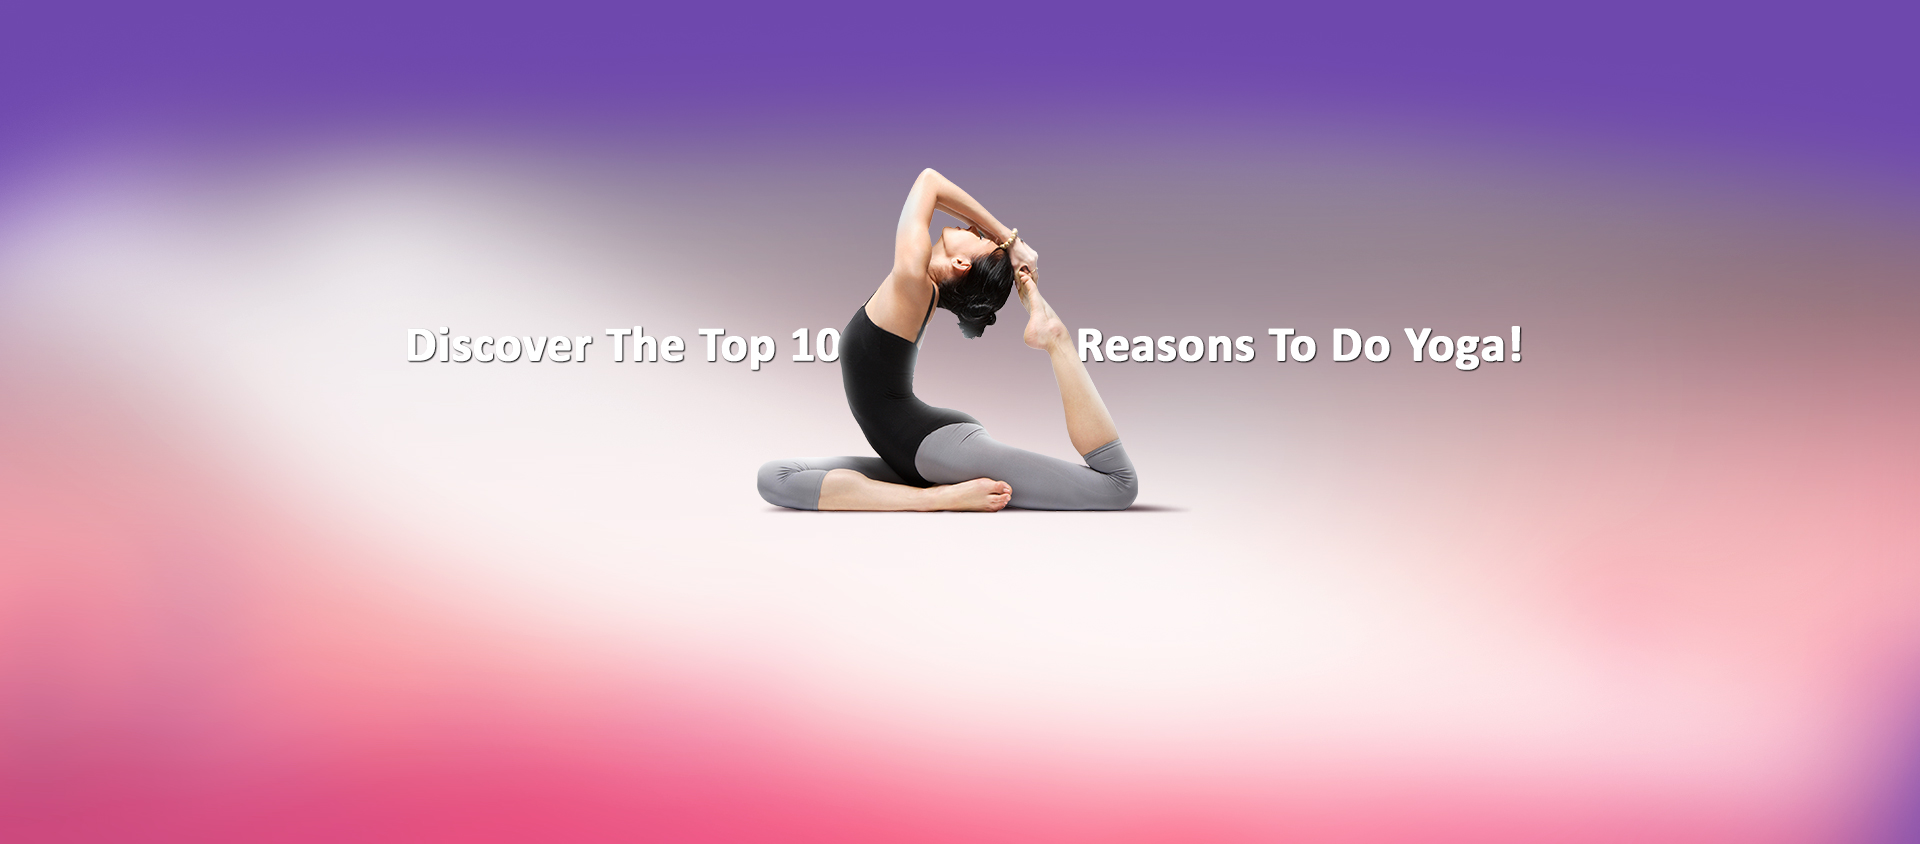 Discover The Top 10 Reasons To Do Yoga